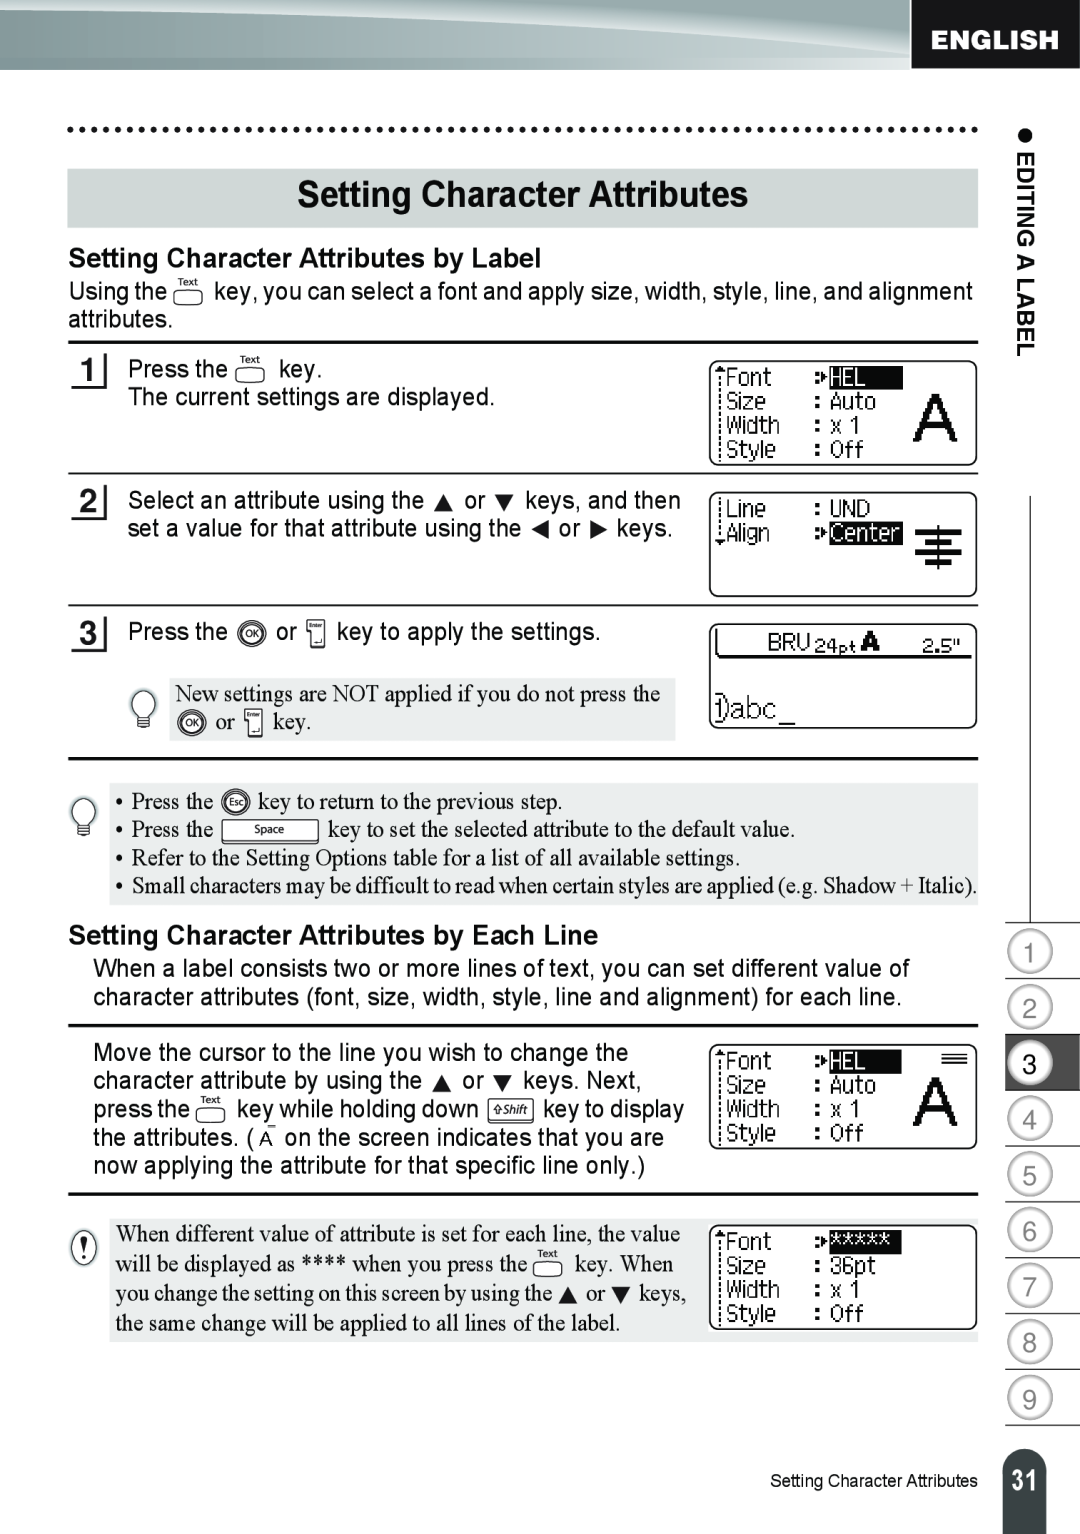 Brother PT-2100 Setting Character Attributes by Label, Setting Character Attributes by Each Line, z EDITING A LABEL 